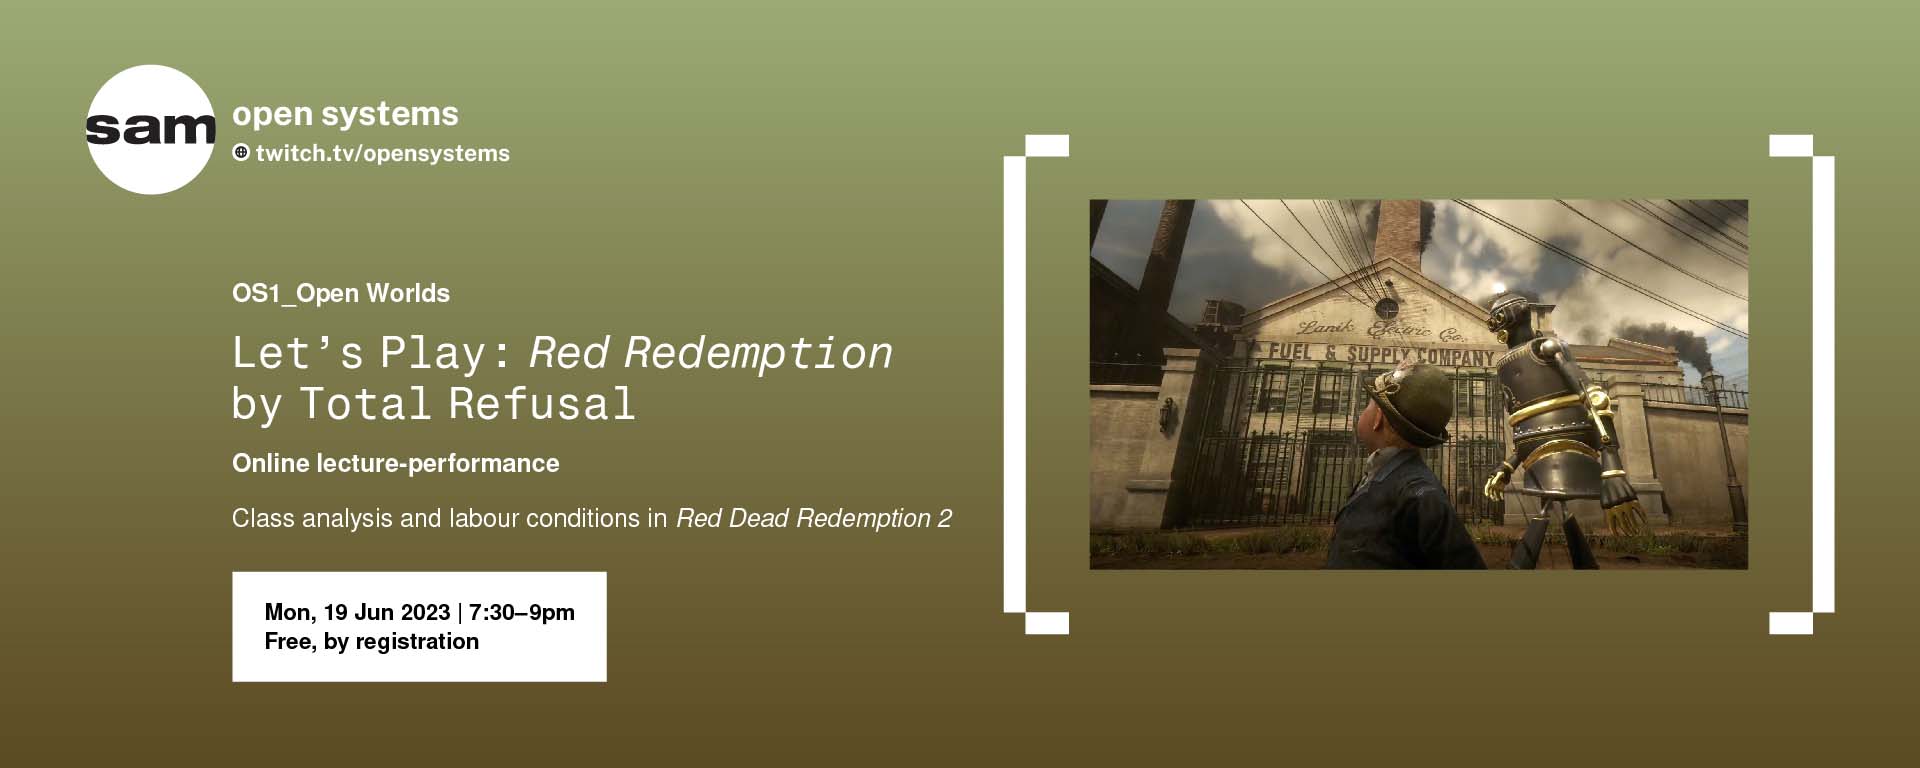 Let's Play: 'Red Redemption' by Total Refusal